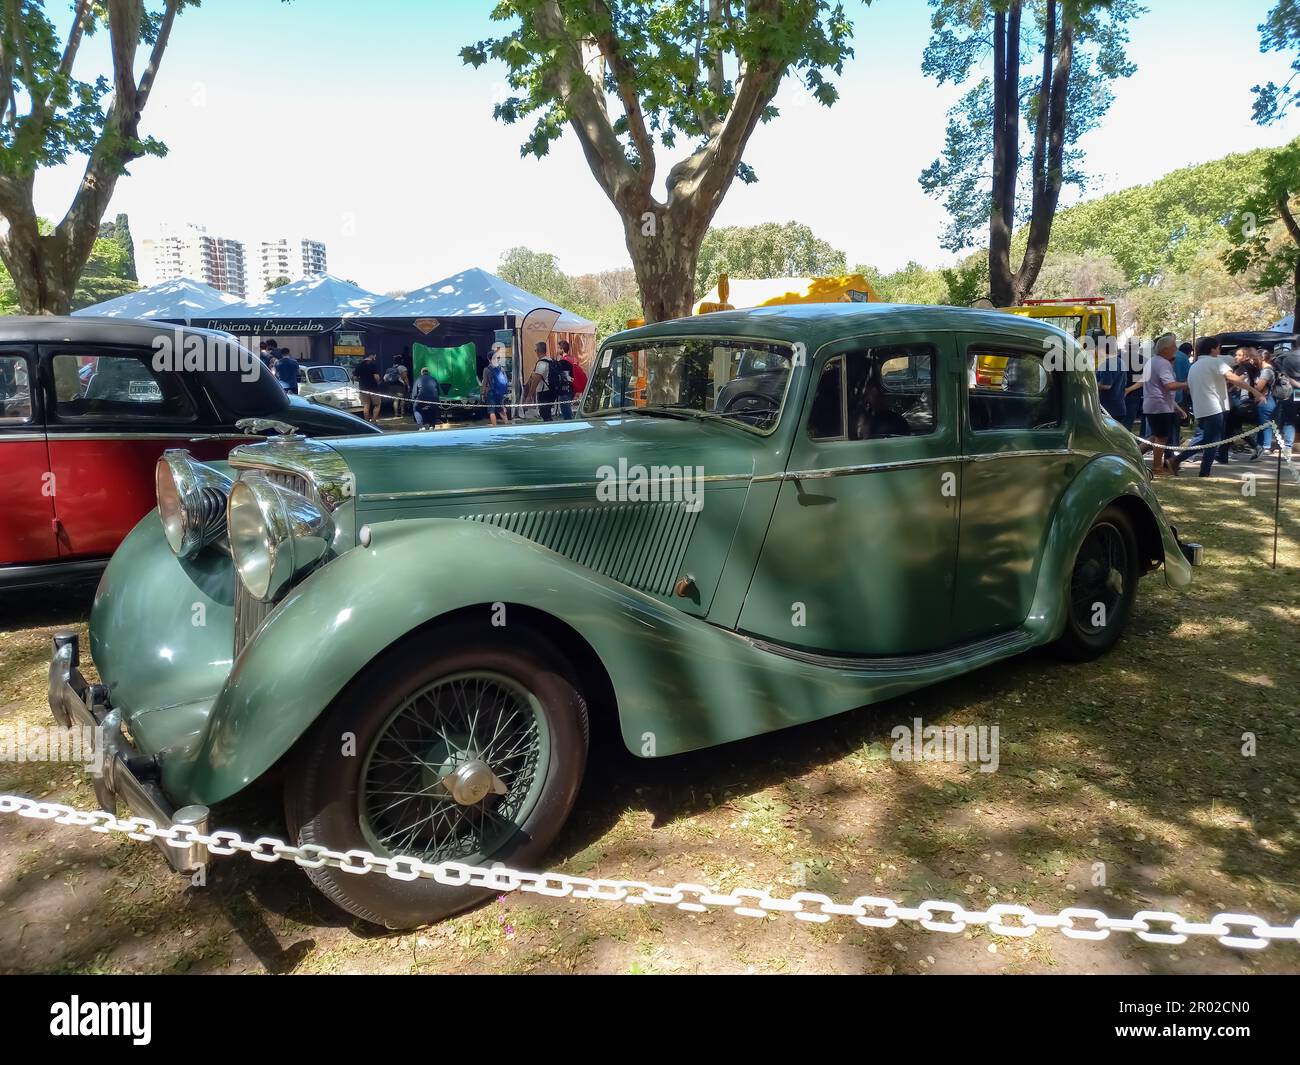 San Isidro, Argentina - Oct 7, 2022: Old green 1947 Jaguar 3.5 L sport saloon in a park. Nature, grass, trees. Autoclasica 2022 classic car show. Stock Photo